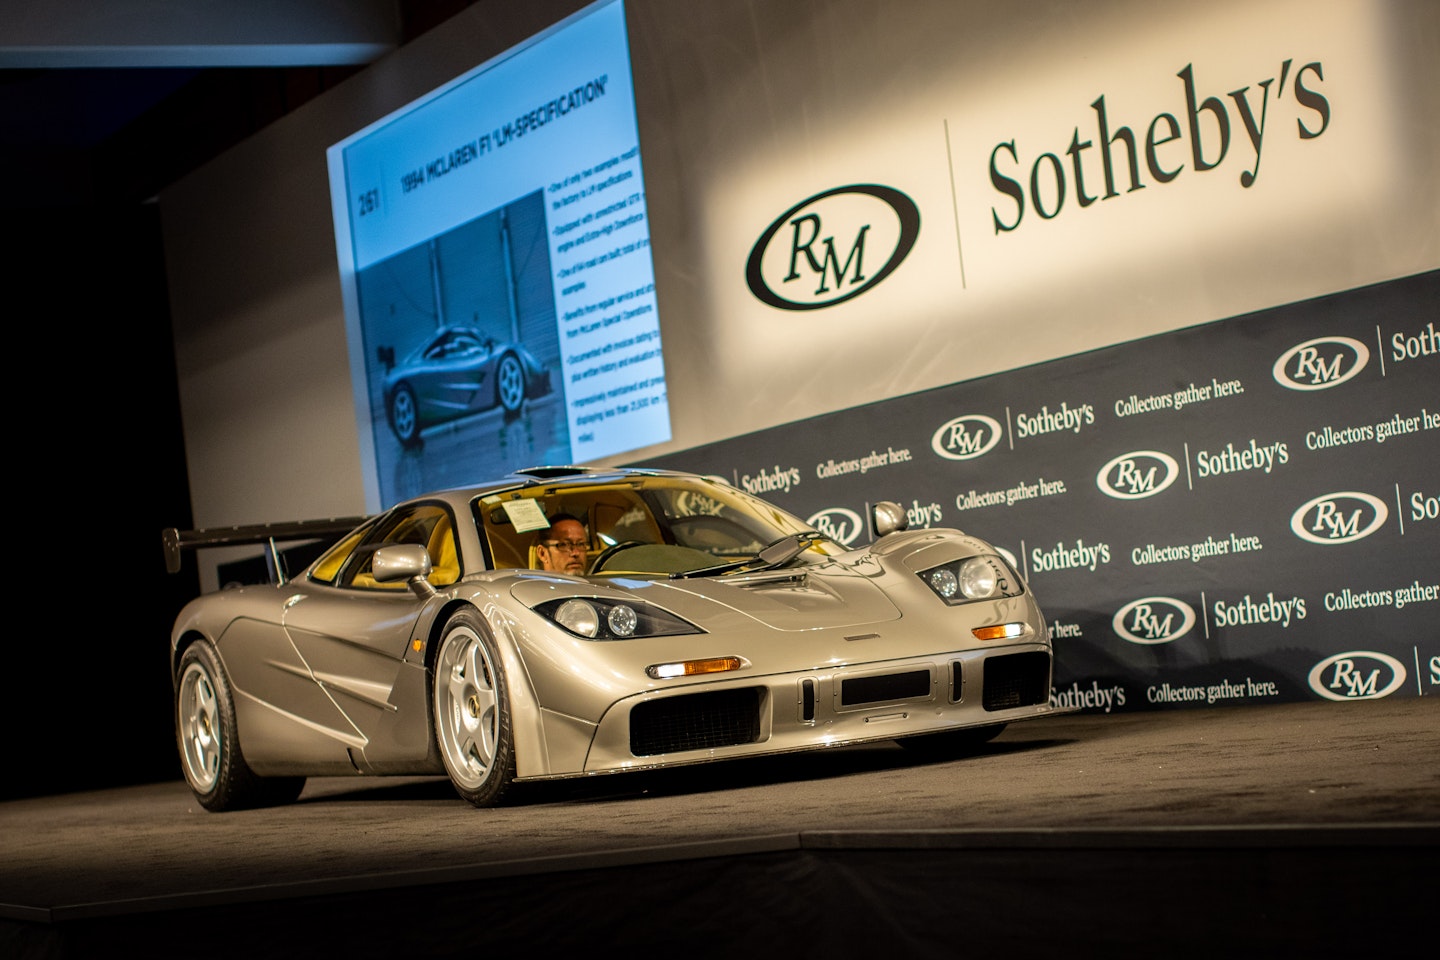 grey classic car on stage for selling at Sothebys auction